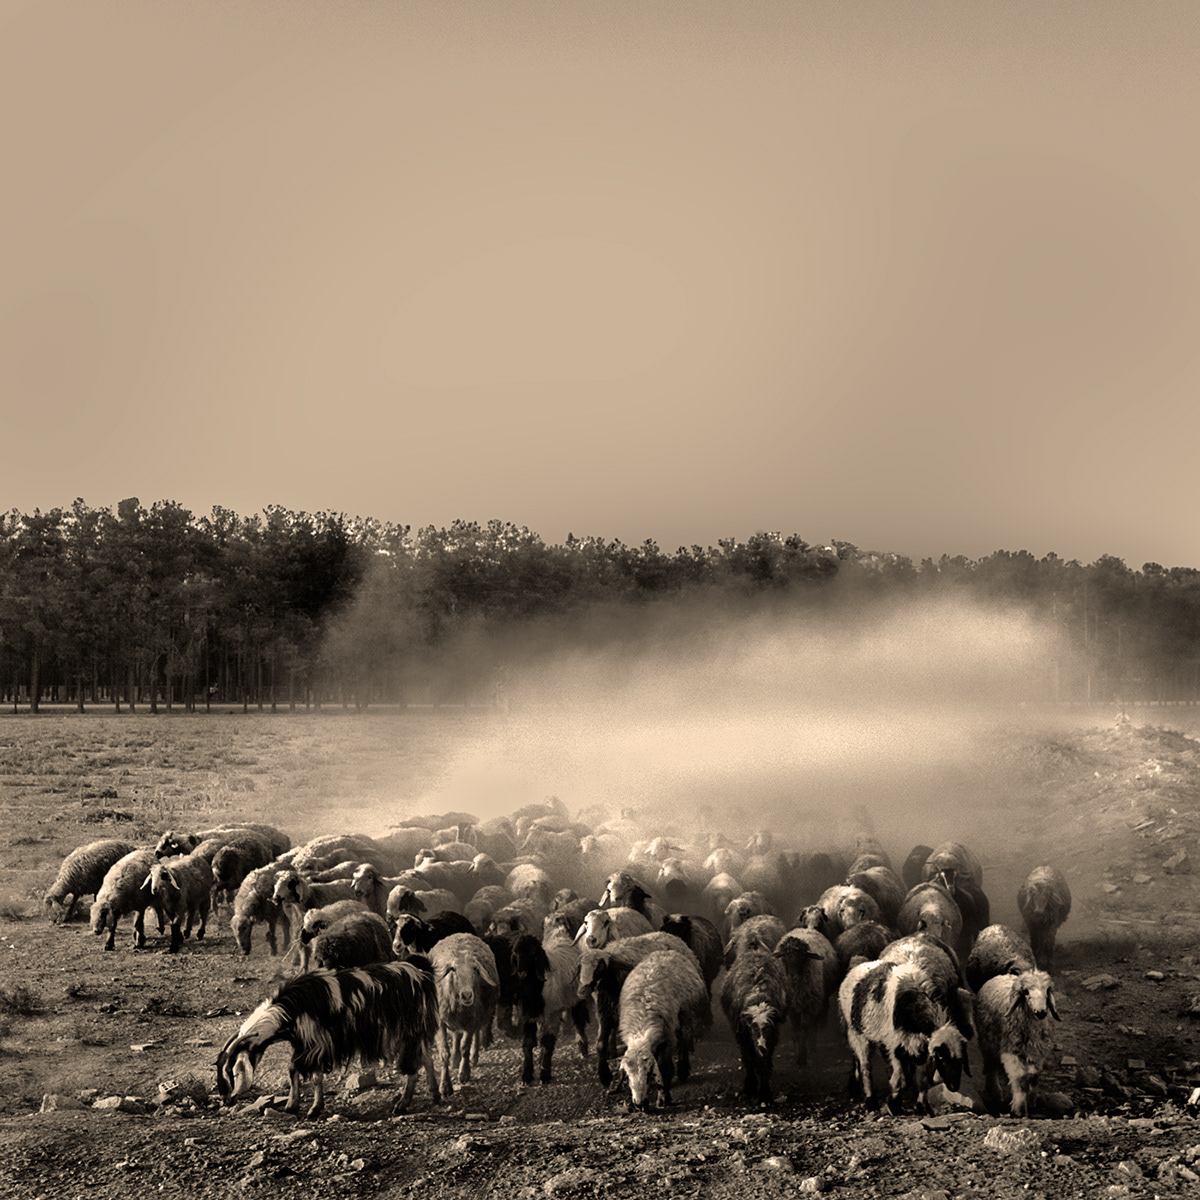 Sheep heading to the barn
Shiraz suburbs, Iran
The work was expressed in digital negative.

